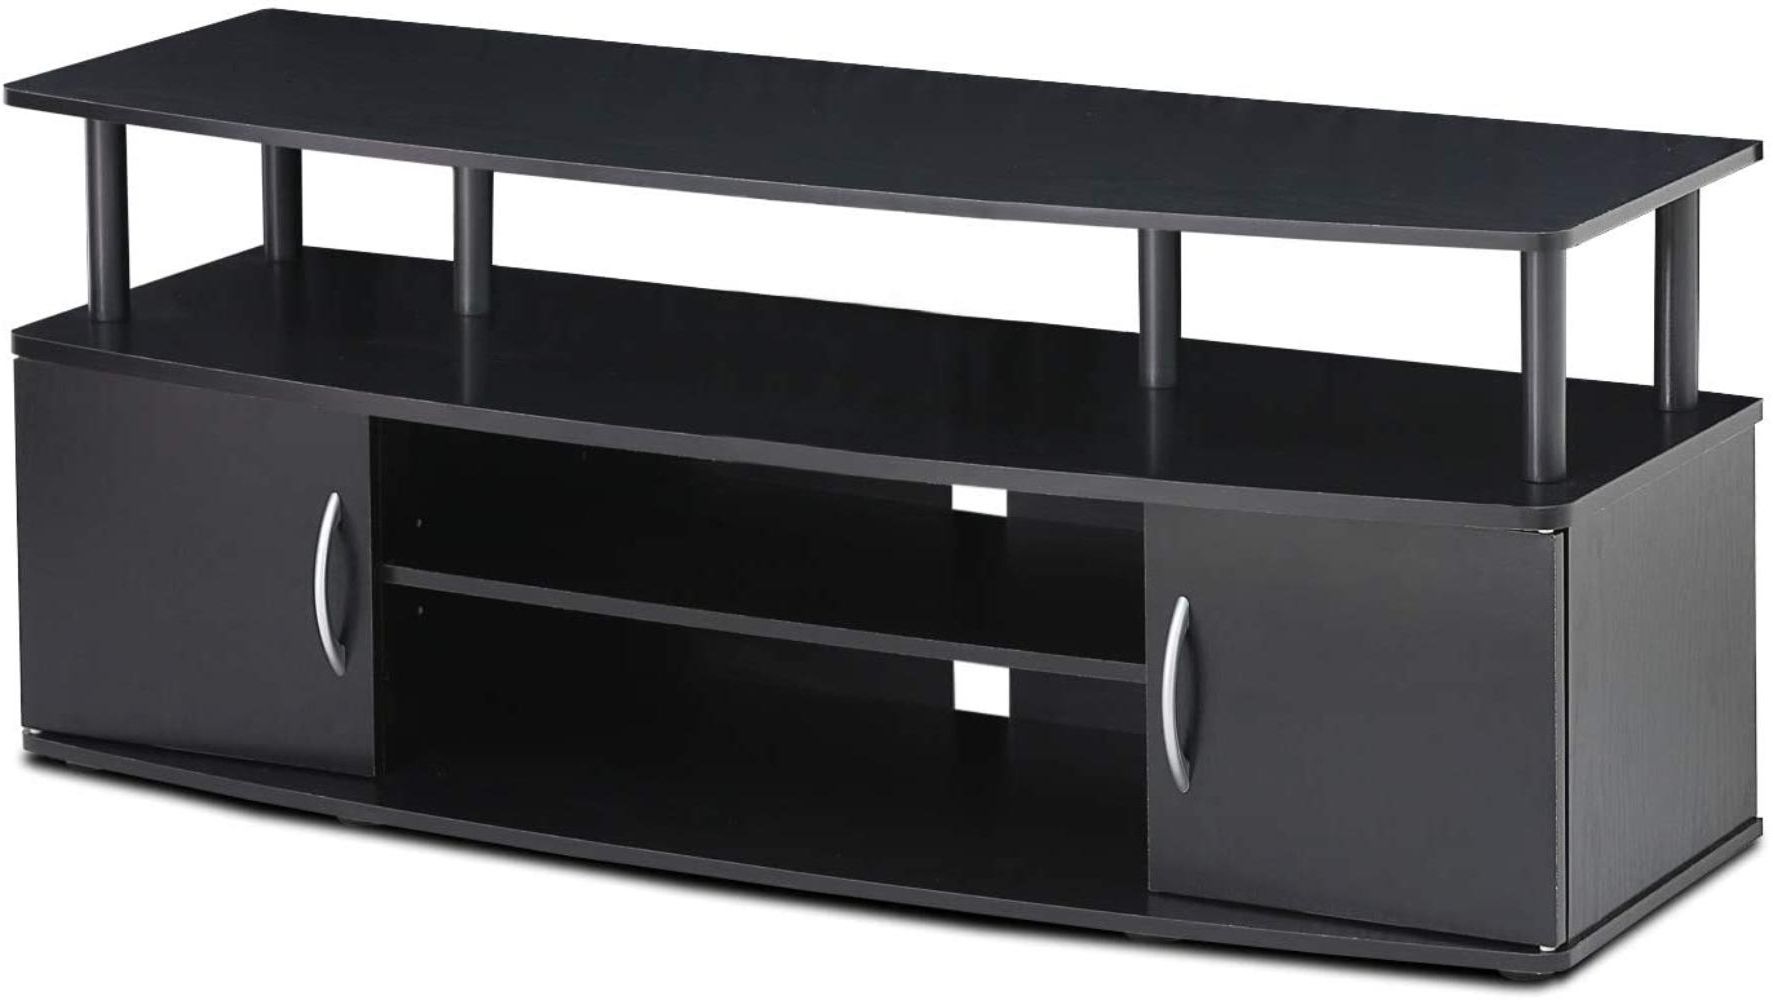 Furinno Jaya Large Entertainment Stand For Tv Up To 50 Within 2018 Lansing Tv Stands For Tvs Up To 50" (View 22 of 25)